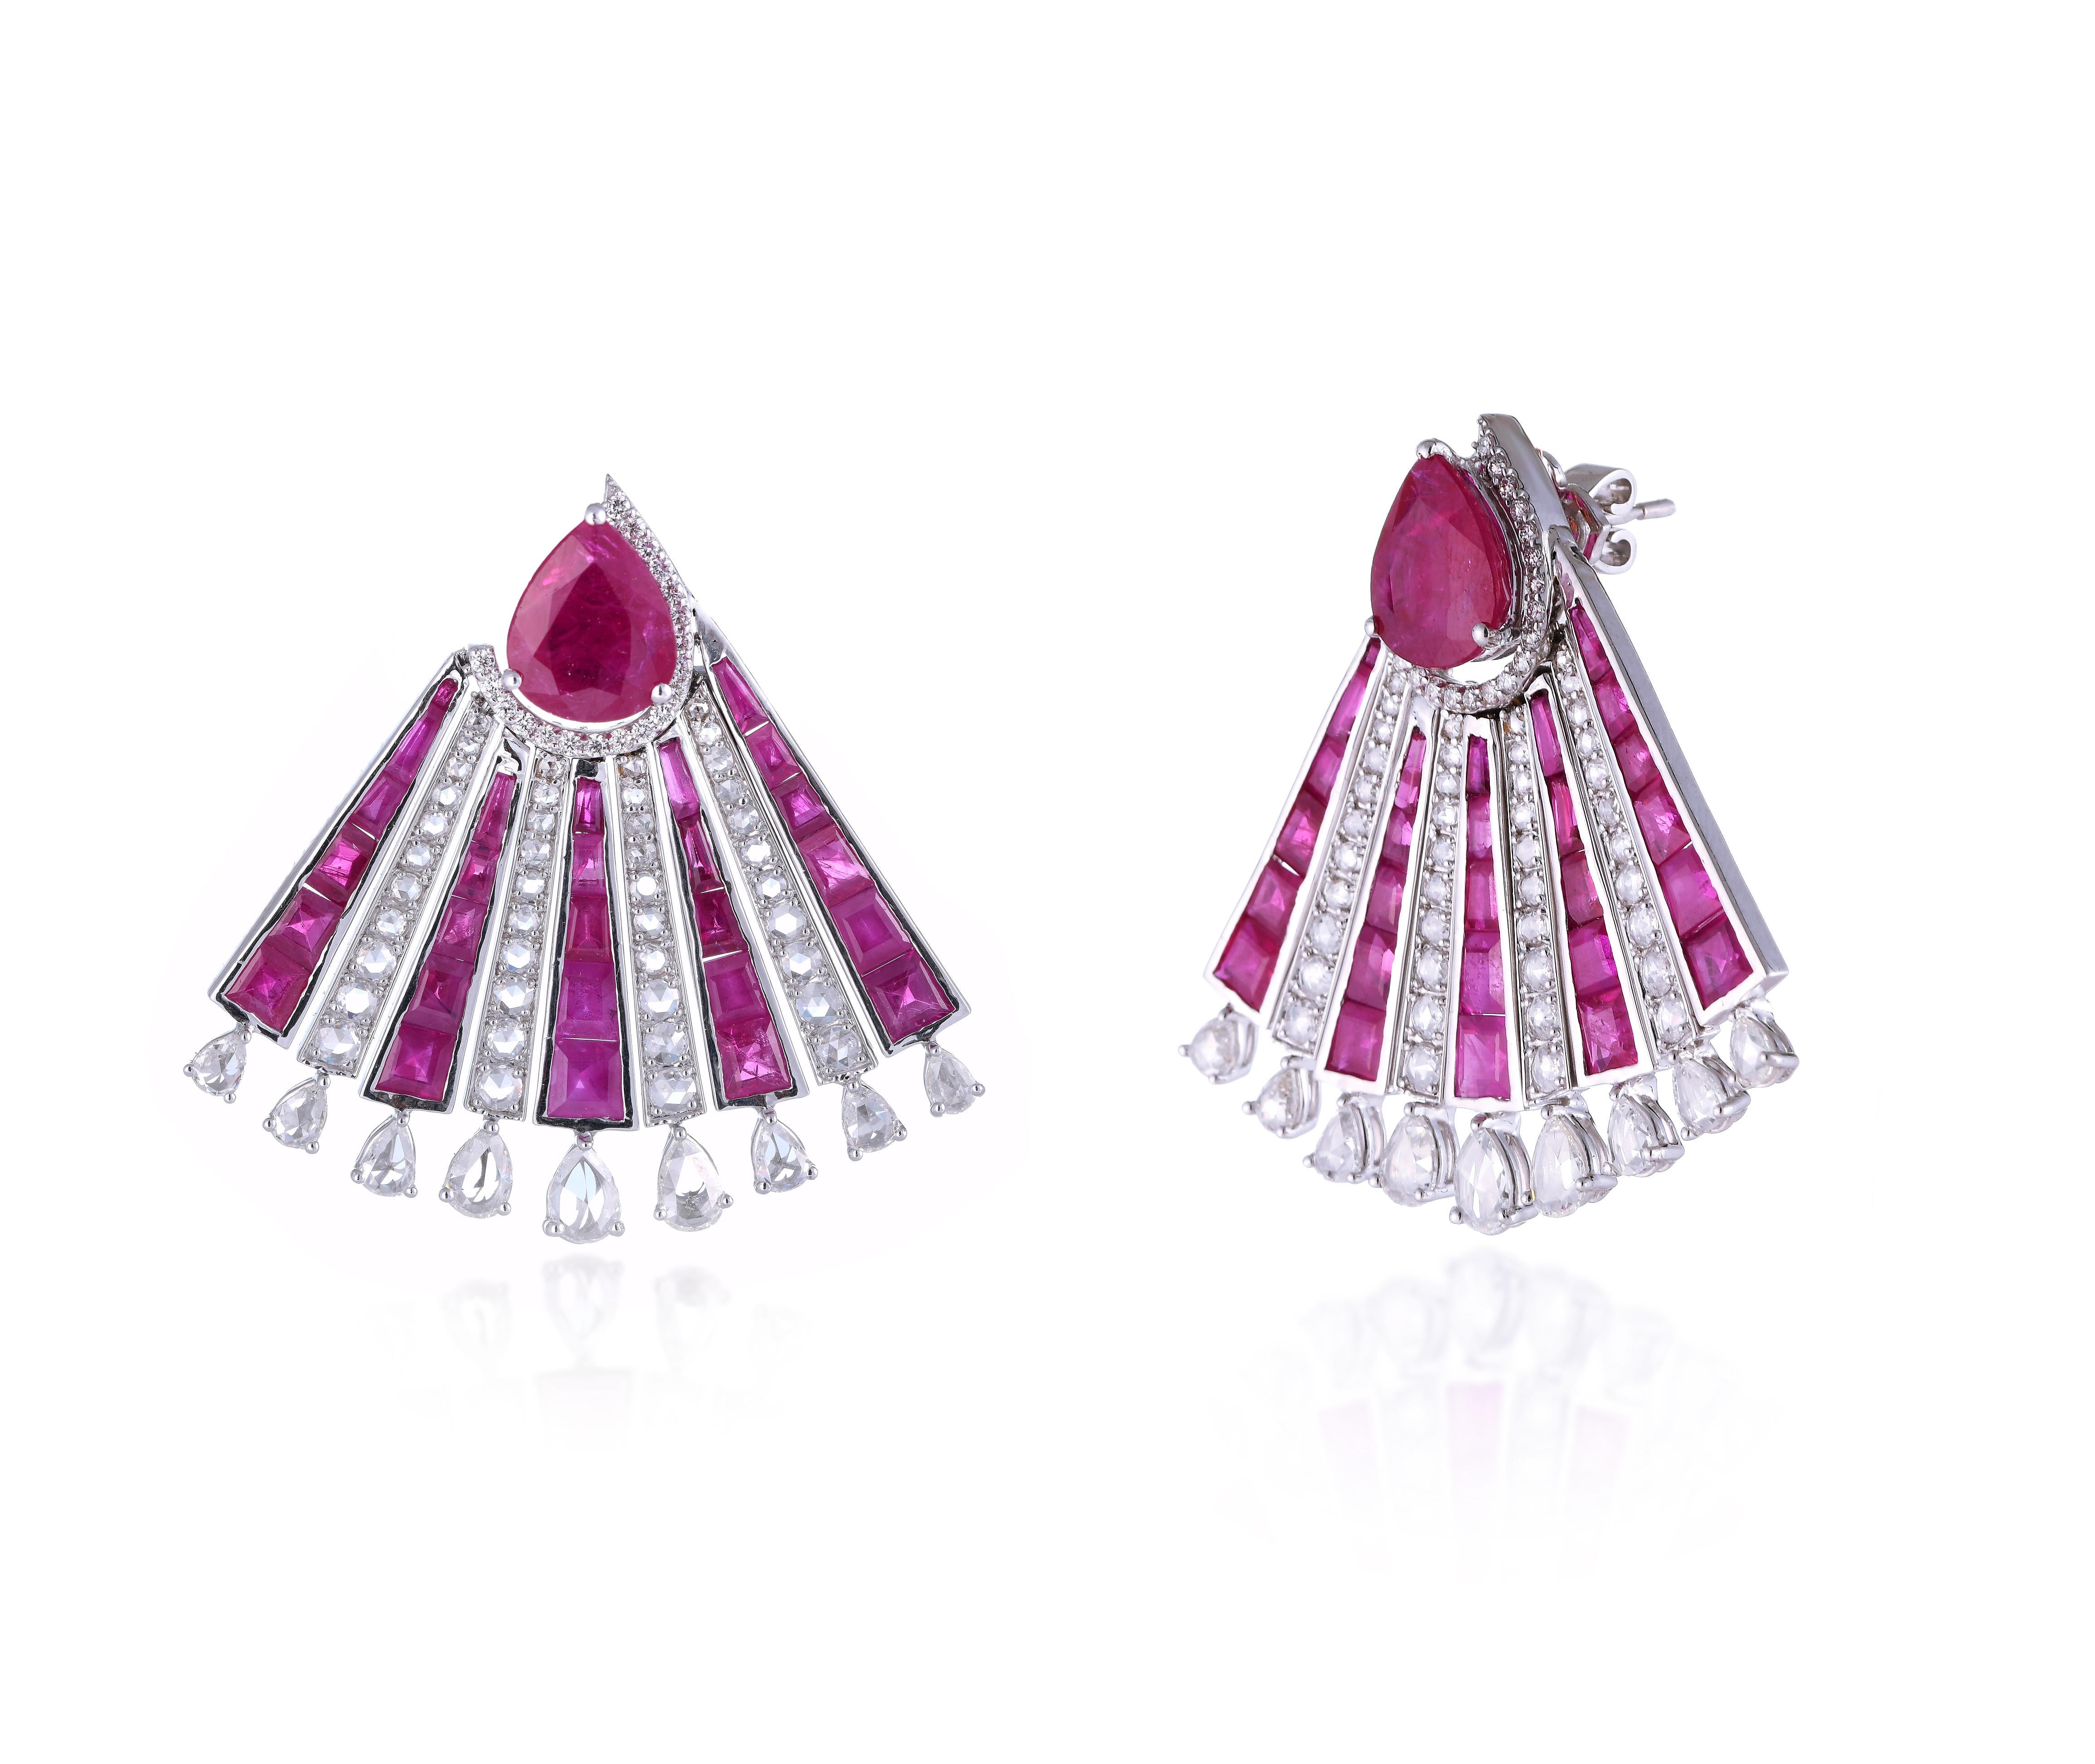 White gold Art Deco studs with a stylish fan silhouette set with approx. 20 carats of rubies and  4.52 carats of full cut and rose cut diamonds.